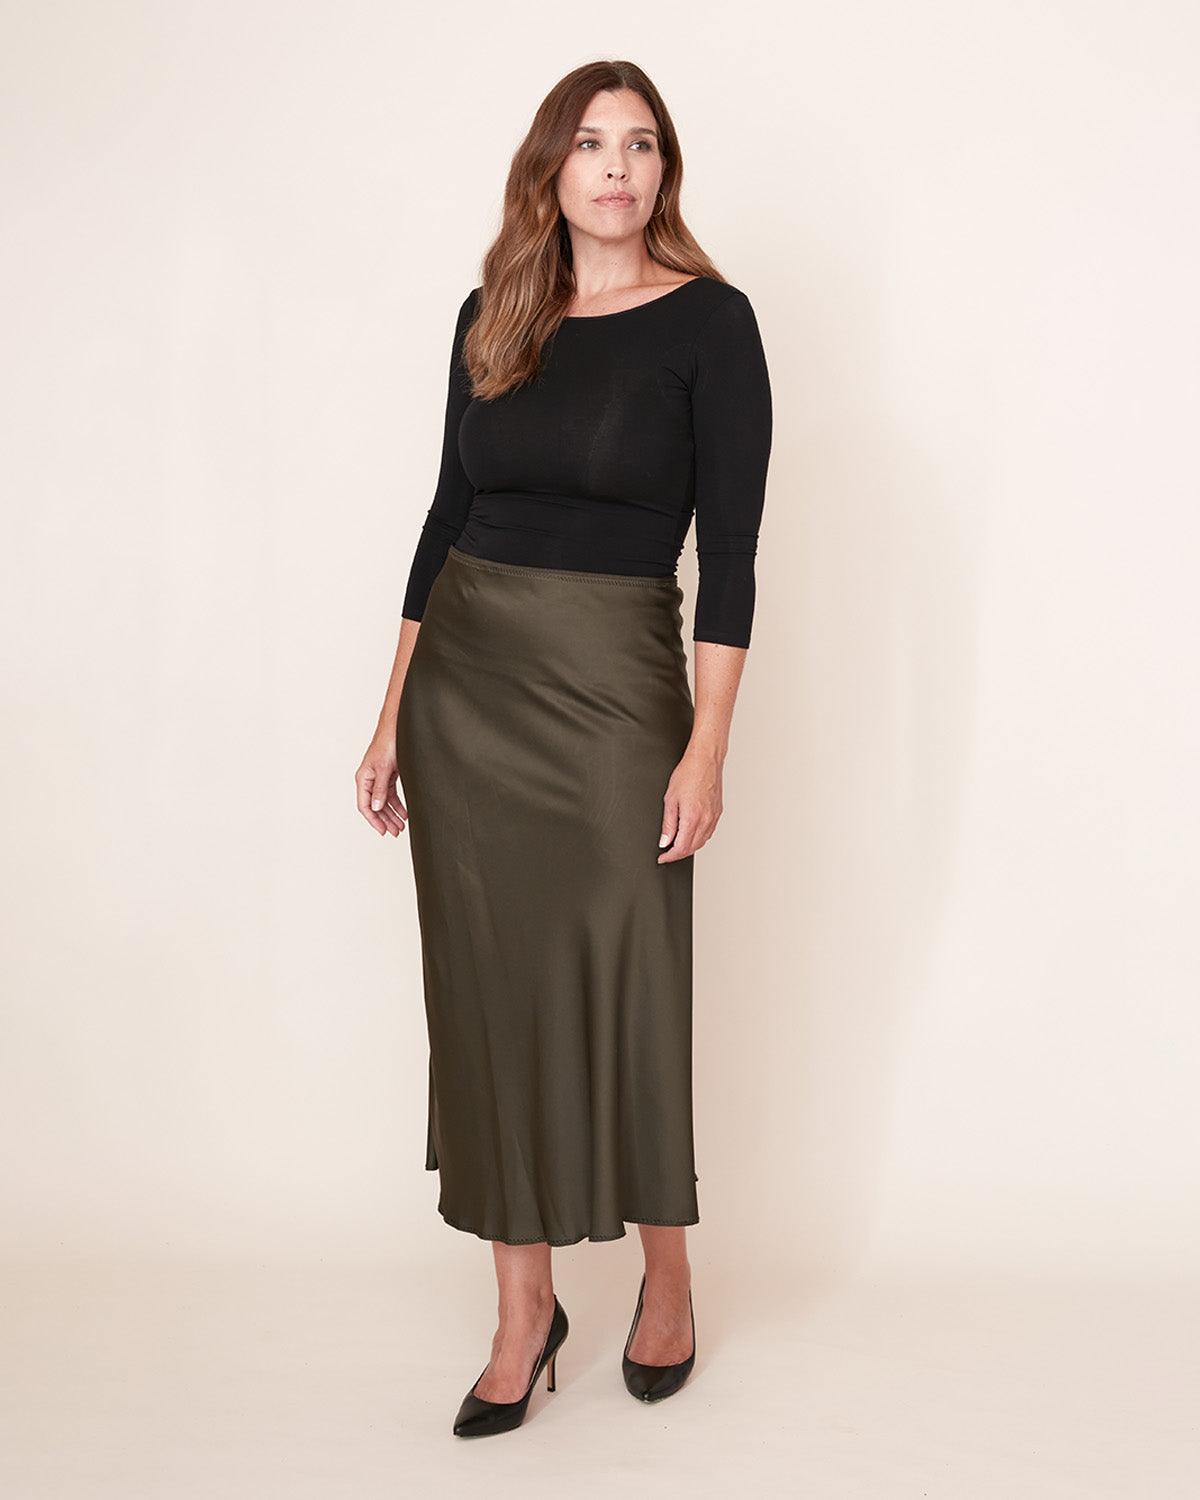 "#color_BLACK|Ashleigh is 5'10", wearing a size M